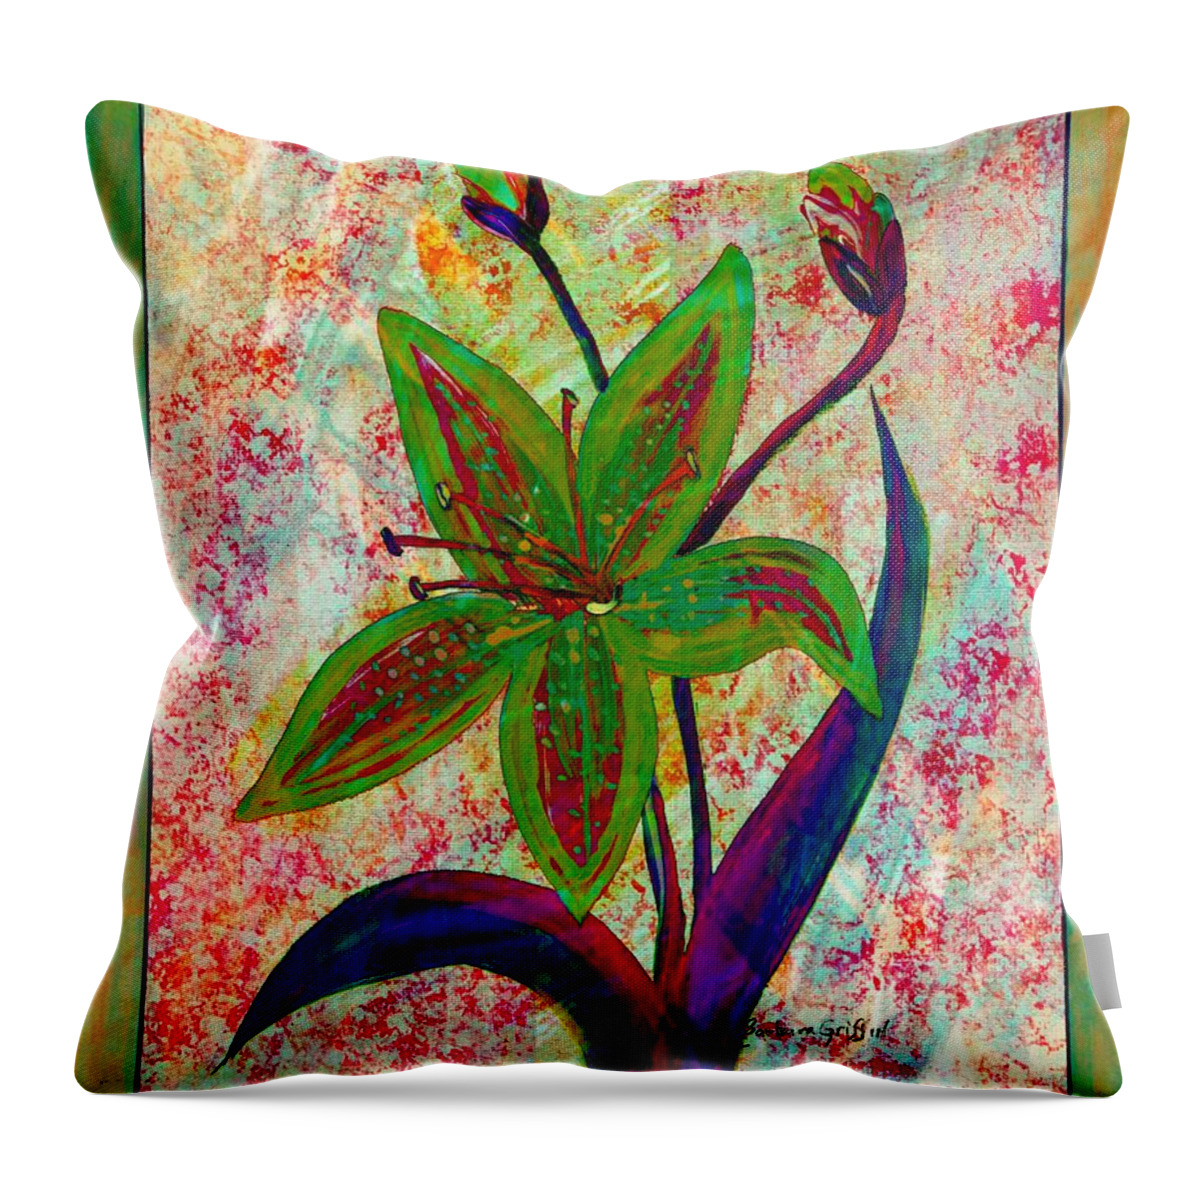 Lily Abstraction Throw Pillow featuring the digital art Lily Abstraction by Barbara A Griffin